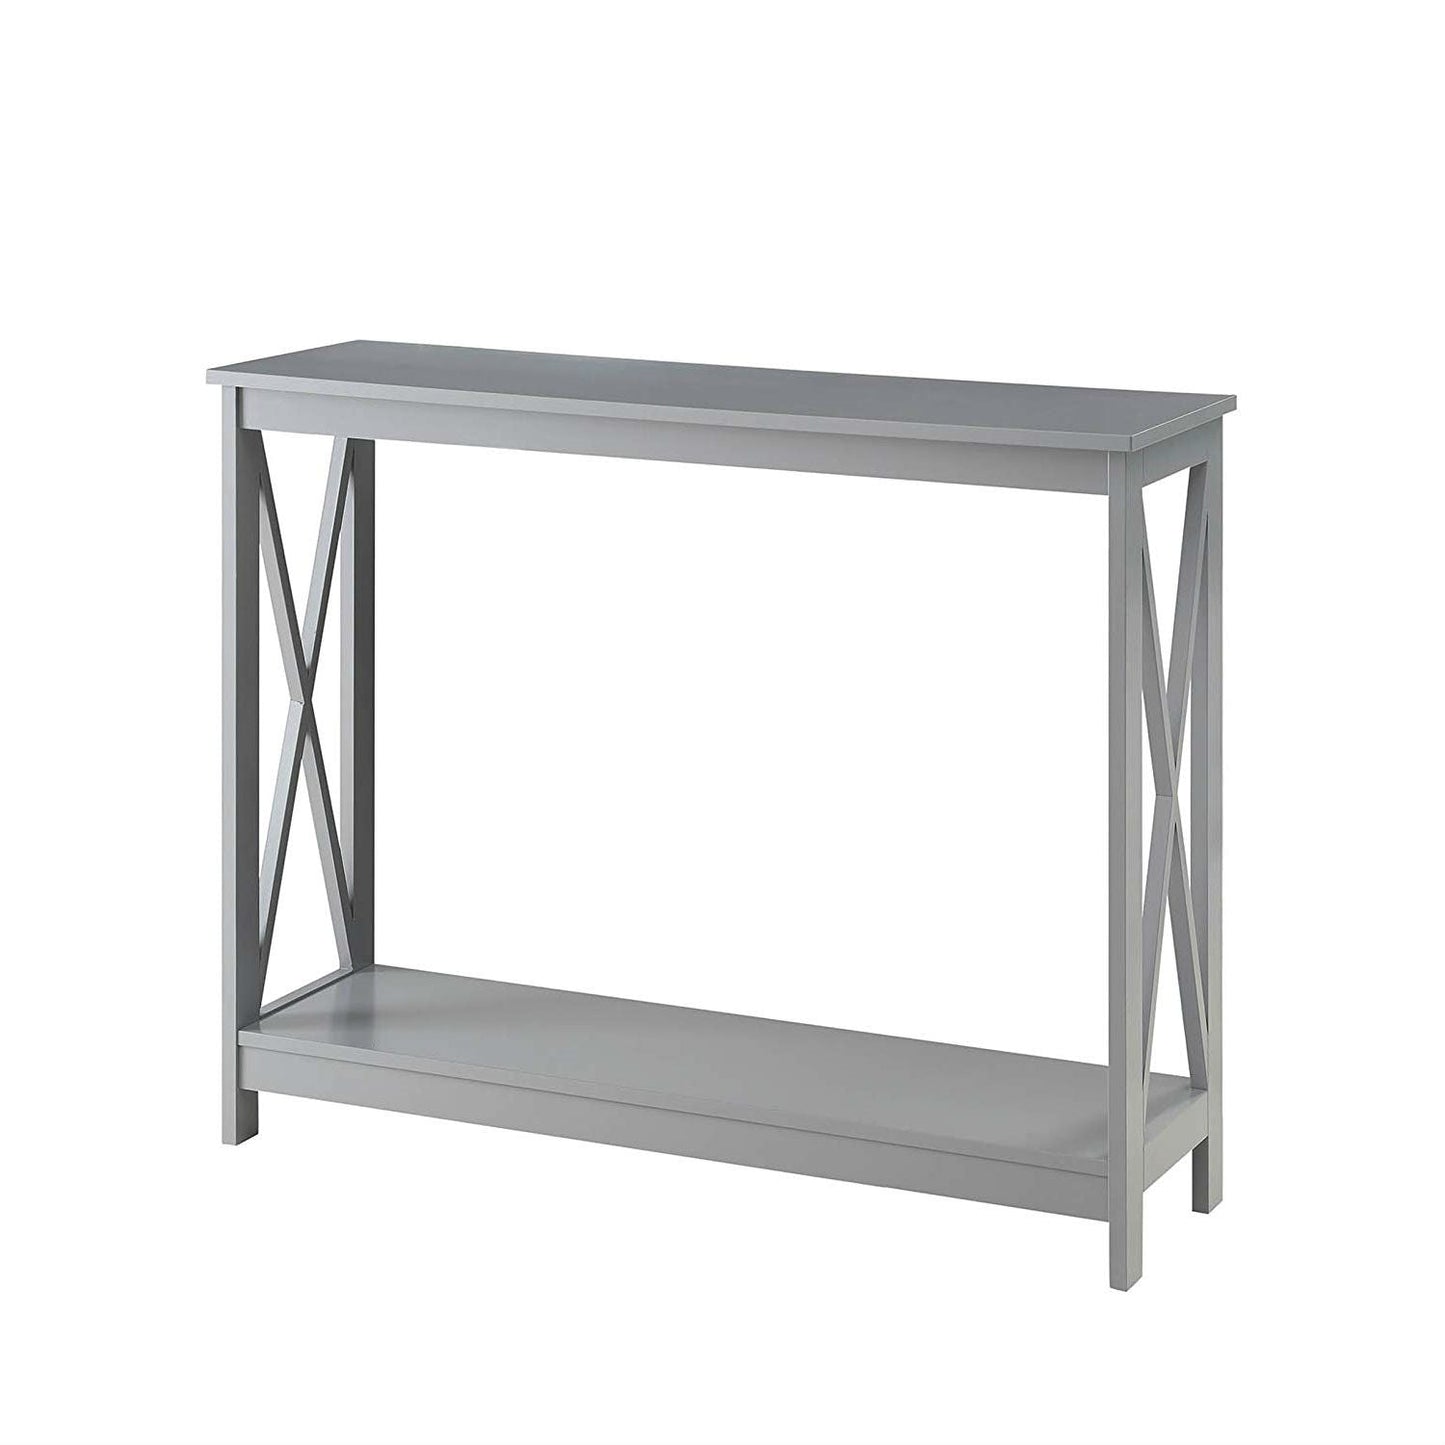 Living Room > Console & Sofa Tables - Grey Wood Console Sofa Table With Bottom Storage Shelf